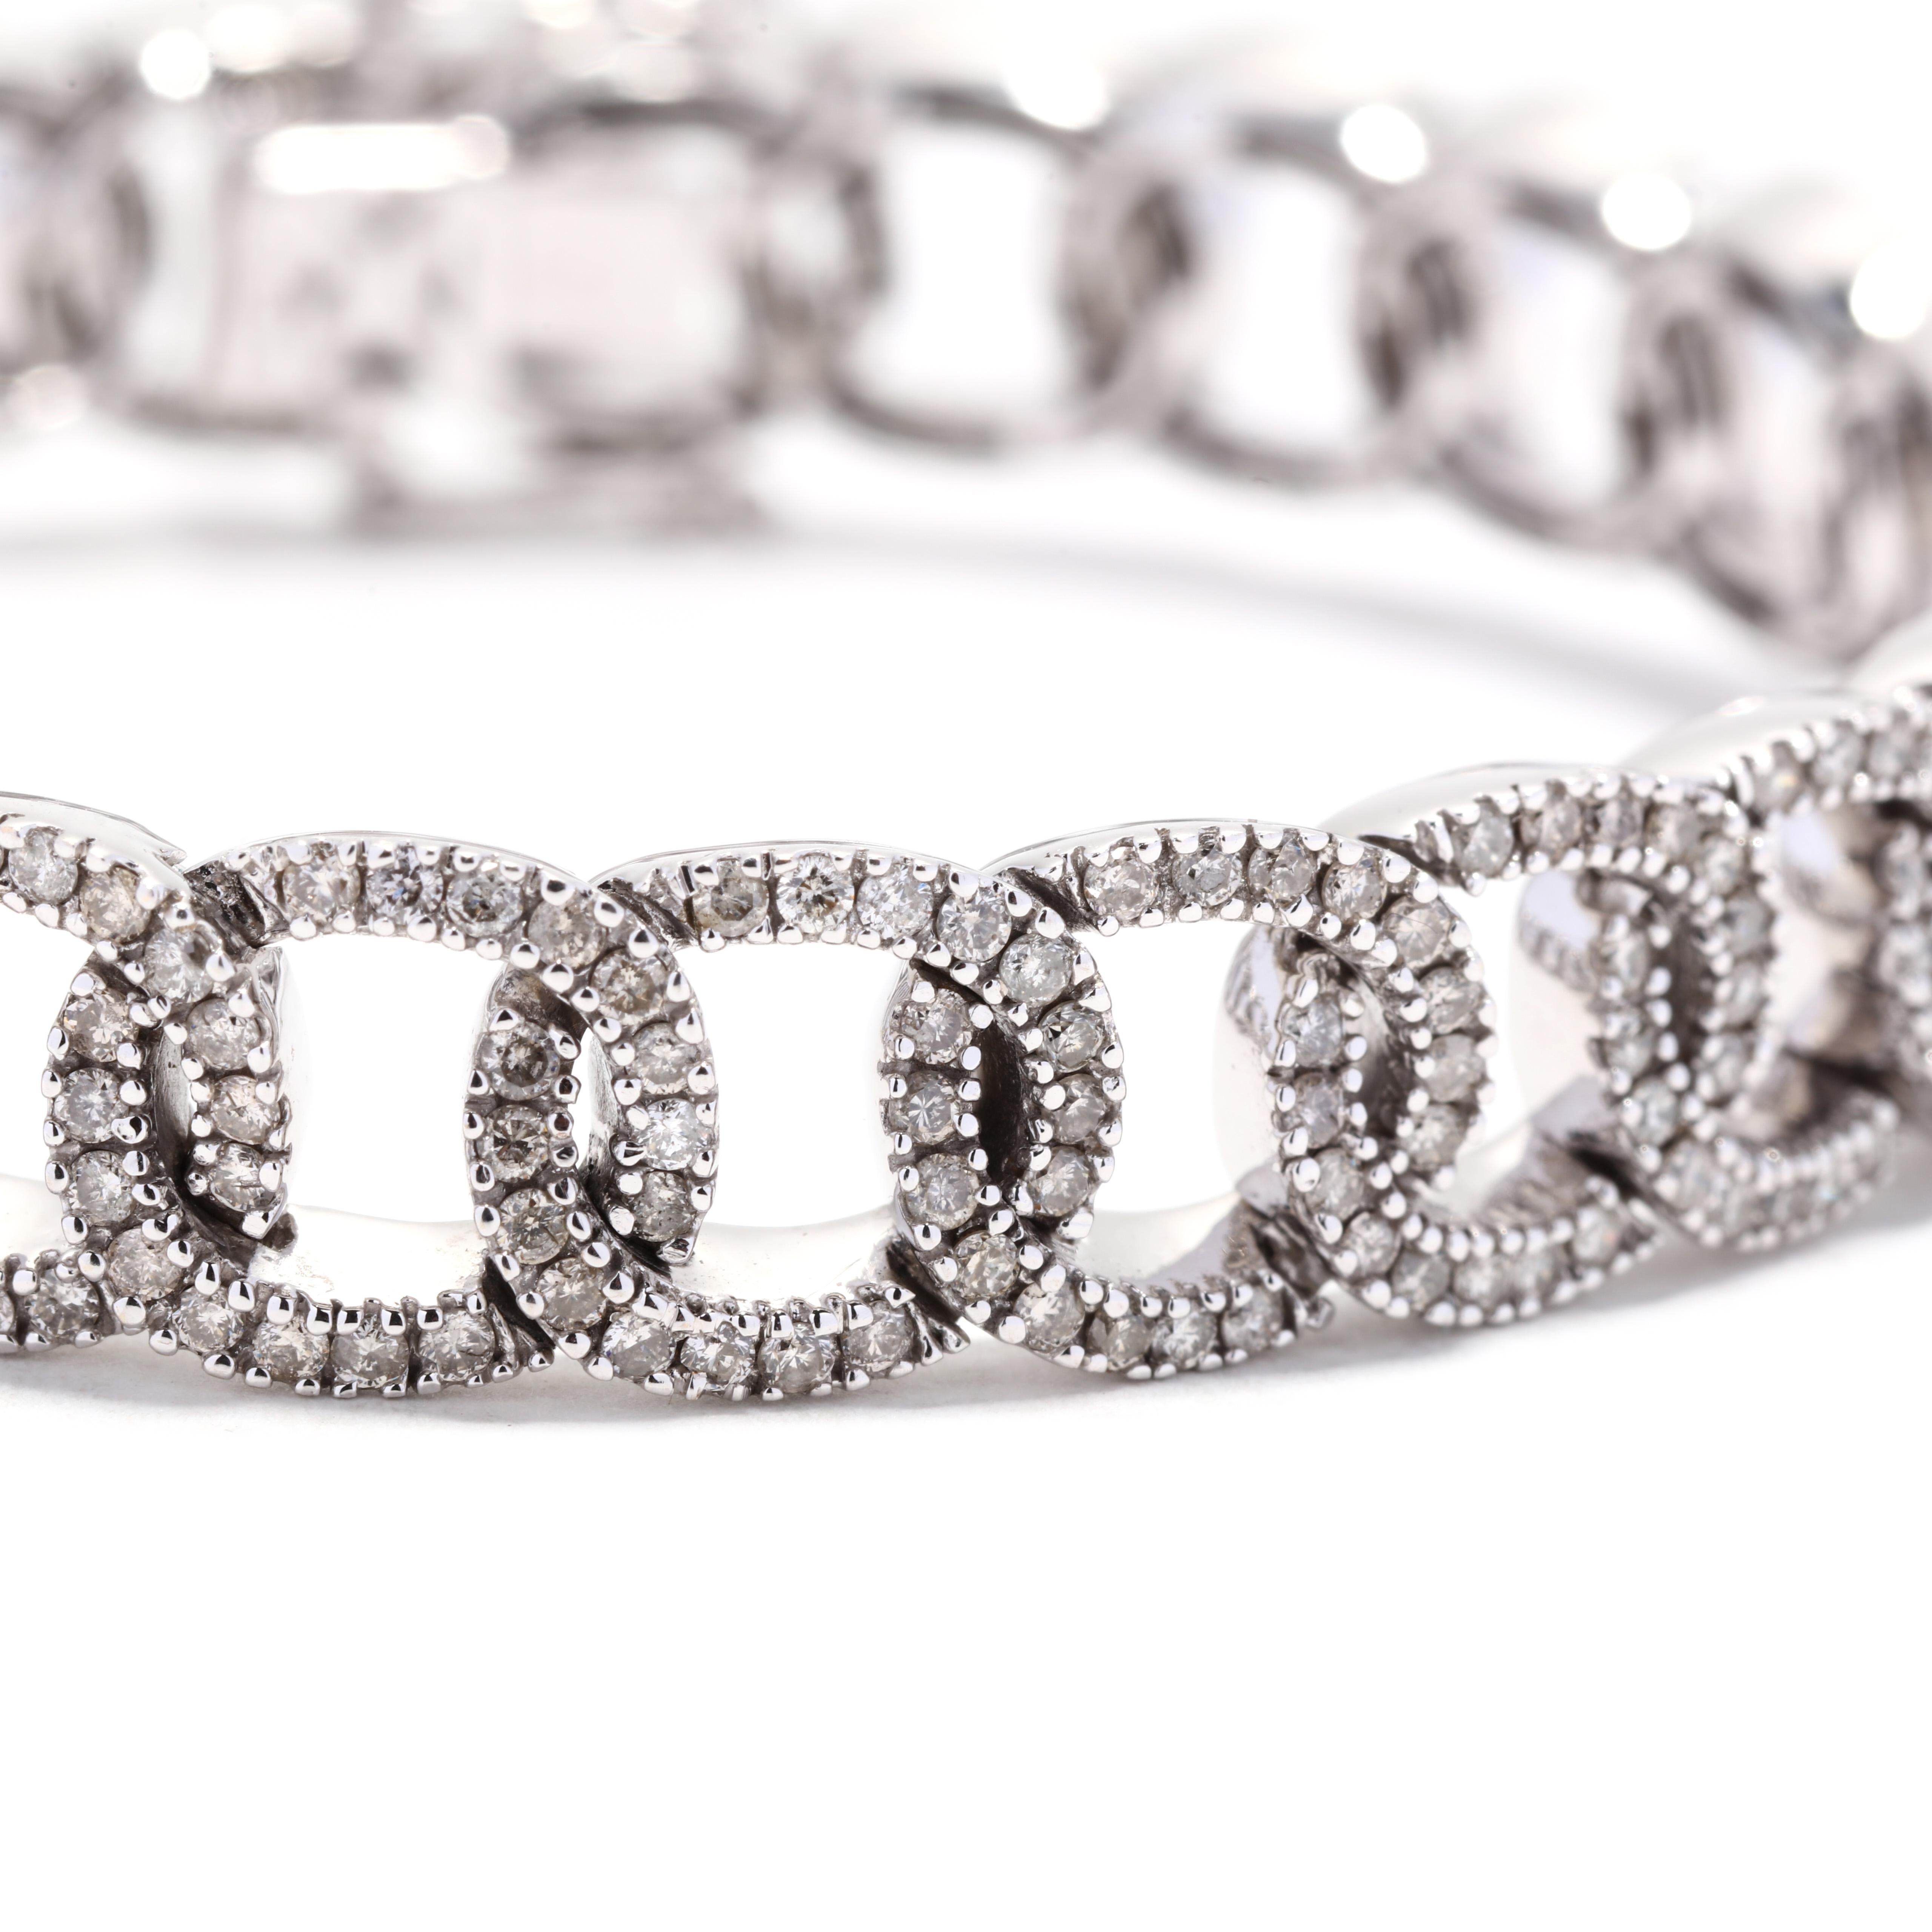 A 14 karat white gold fancy diamond link bracelet. This statement diamond bracelet features flat, open oval links with pavé set round brilliant cut diamonds weighing 4.13 total carats and with a hidden box clasp.

Stones:
- diamonds, 400 stones
-